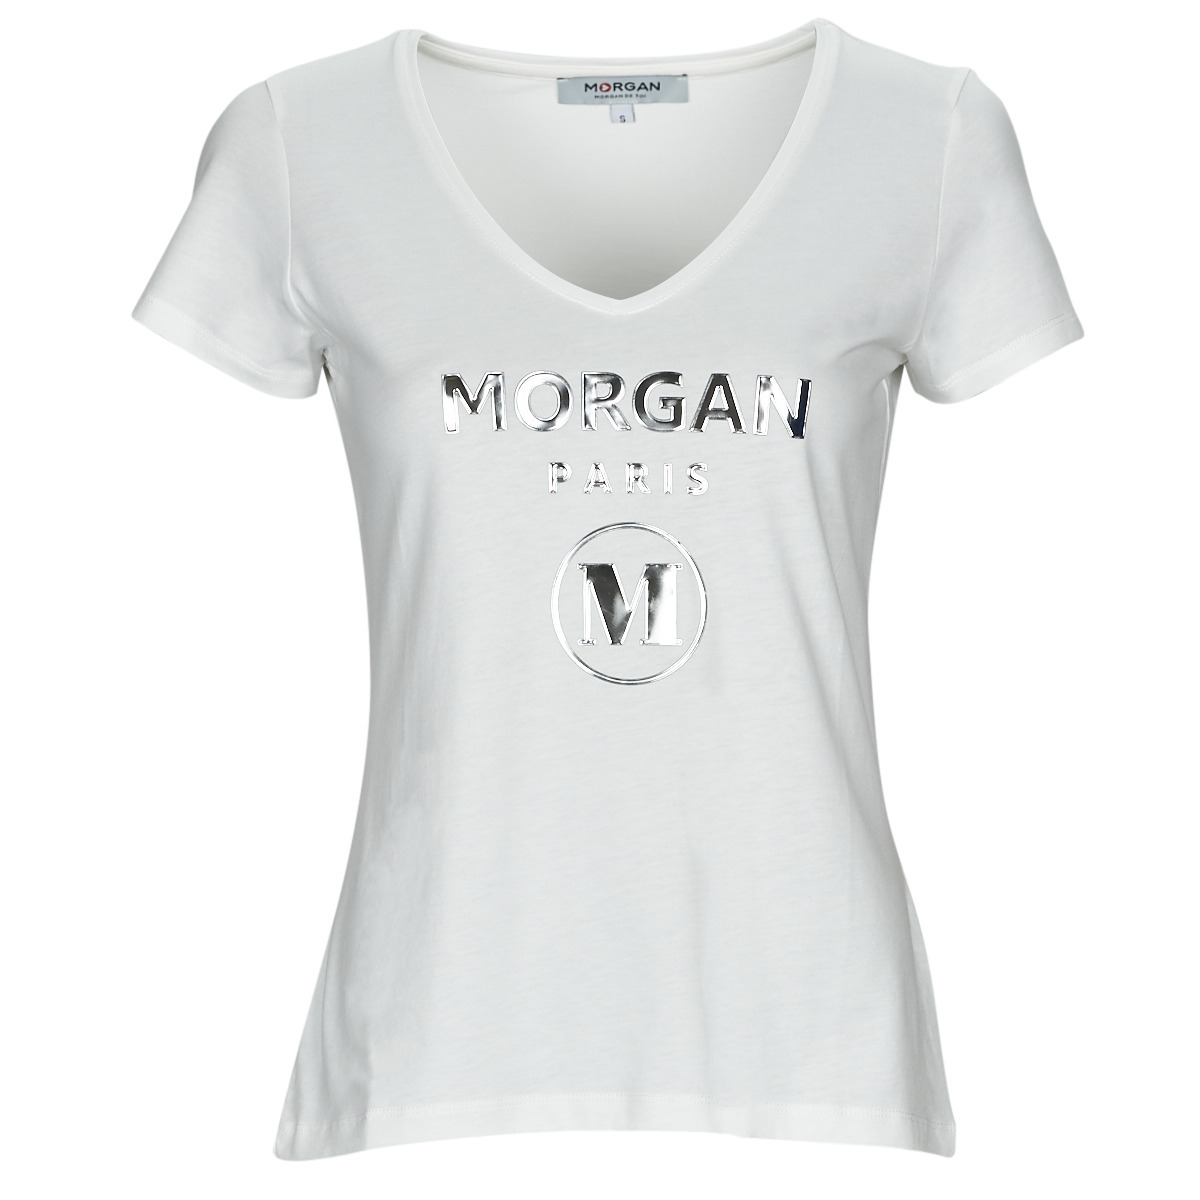 Morgan - Lady T-Shirt in White from Spartoo GOOFASH